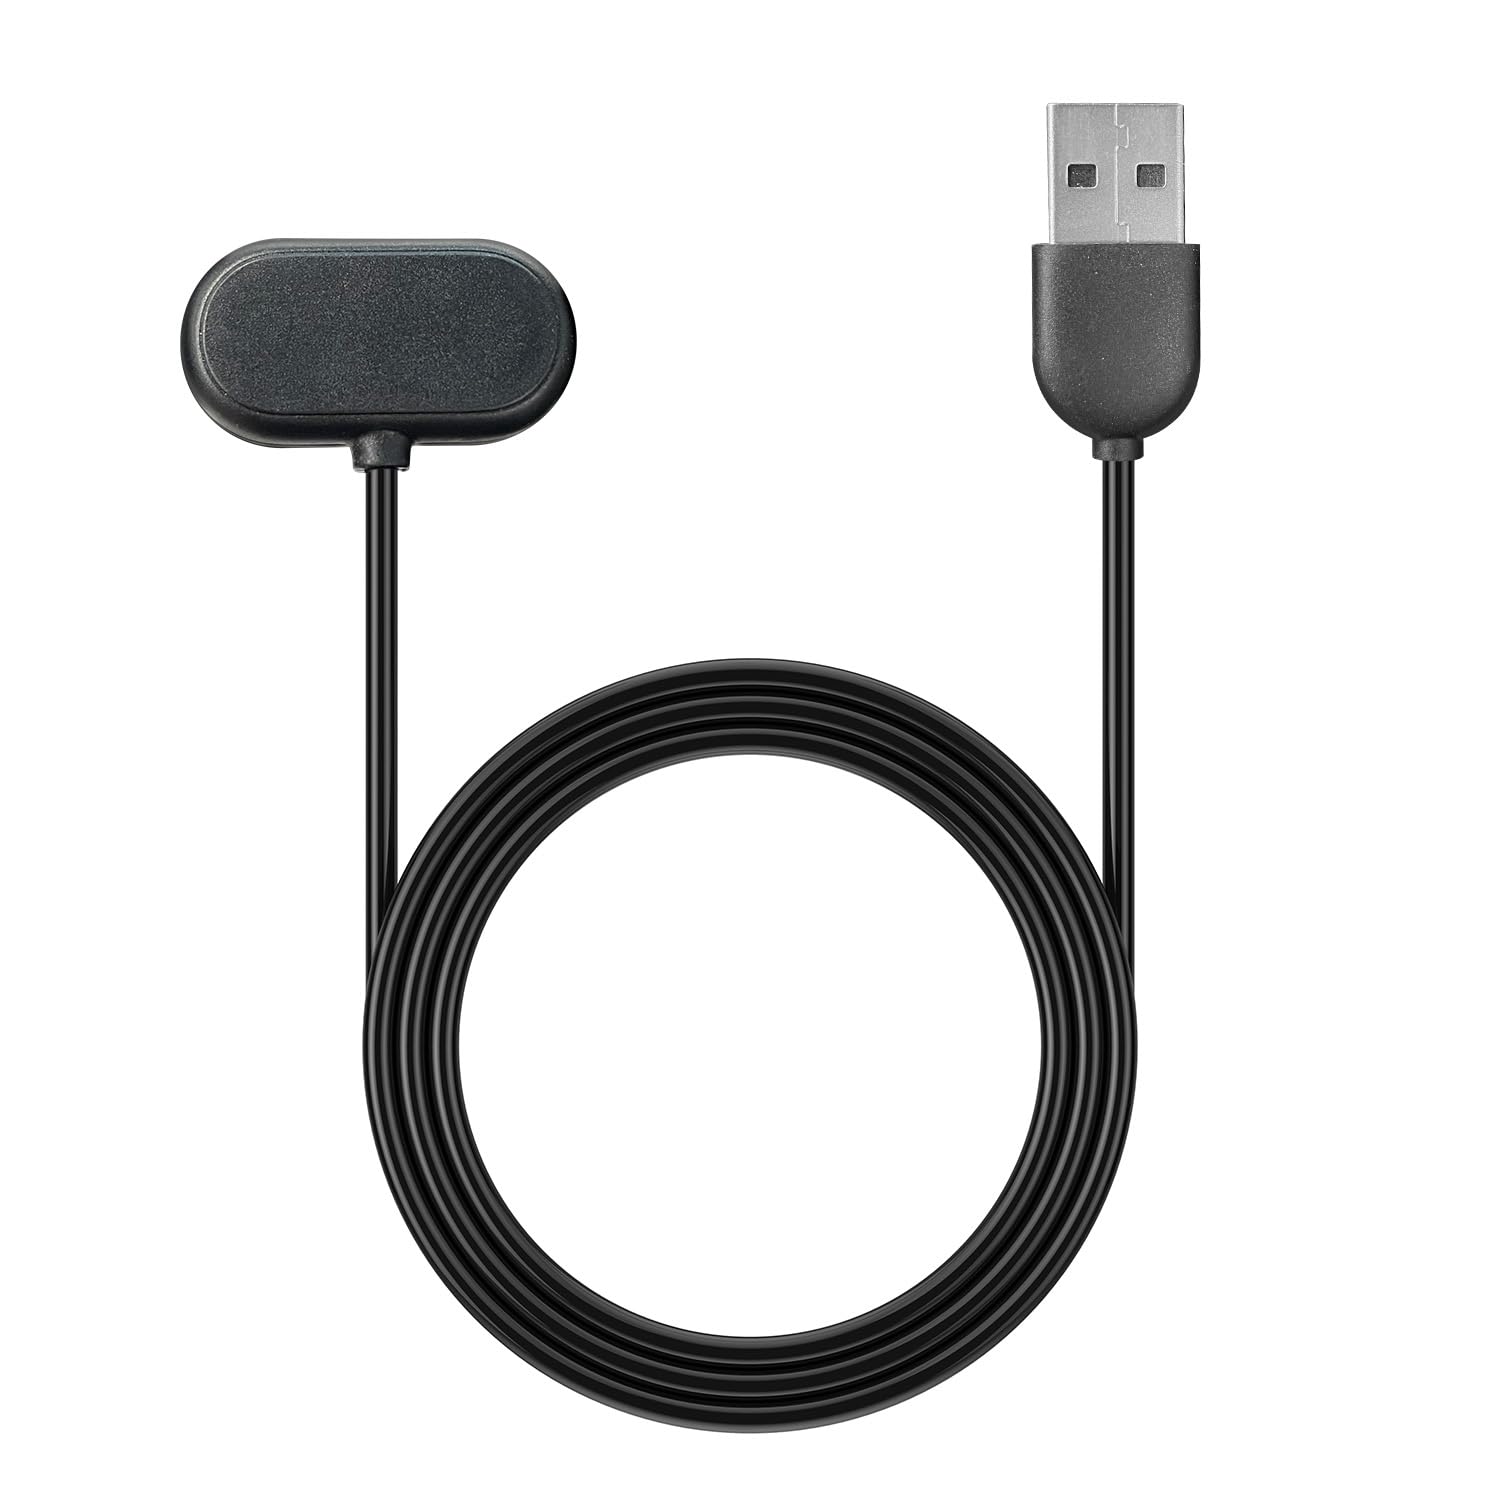 Amazfit Charger Cable GTR 4, GTS 4, Cheetah Series, GTR 3 Pro, GTR 3, GTS 3, T-Rex 2, Replacement Magnetic Charging Cable, Official Product